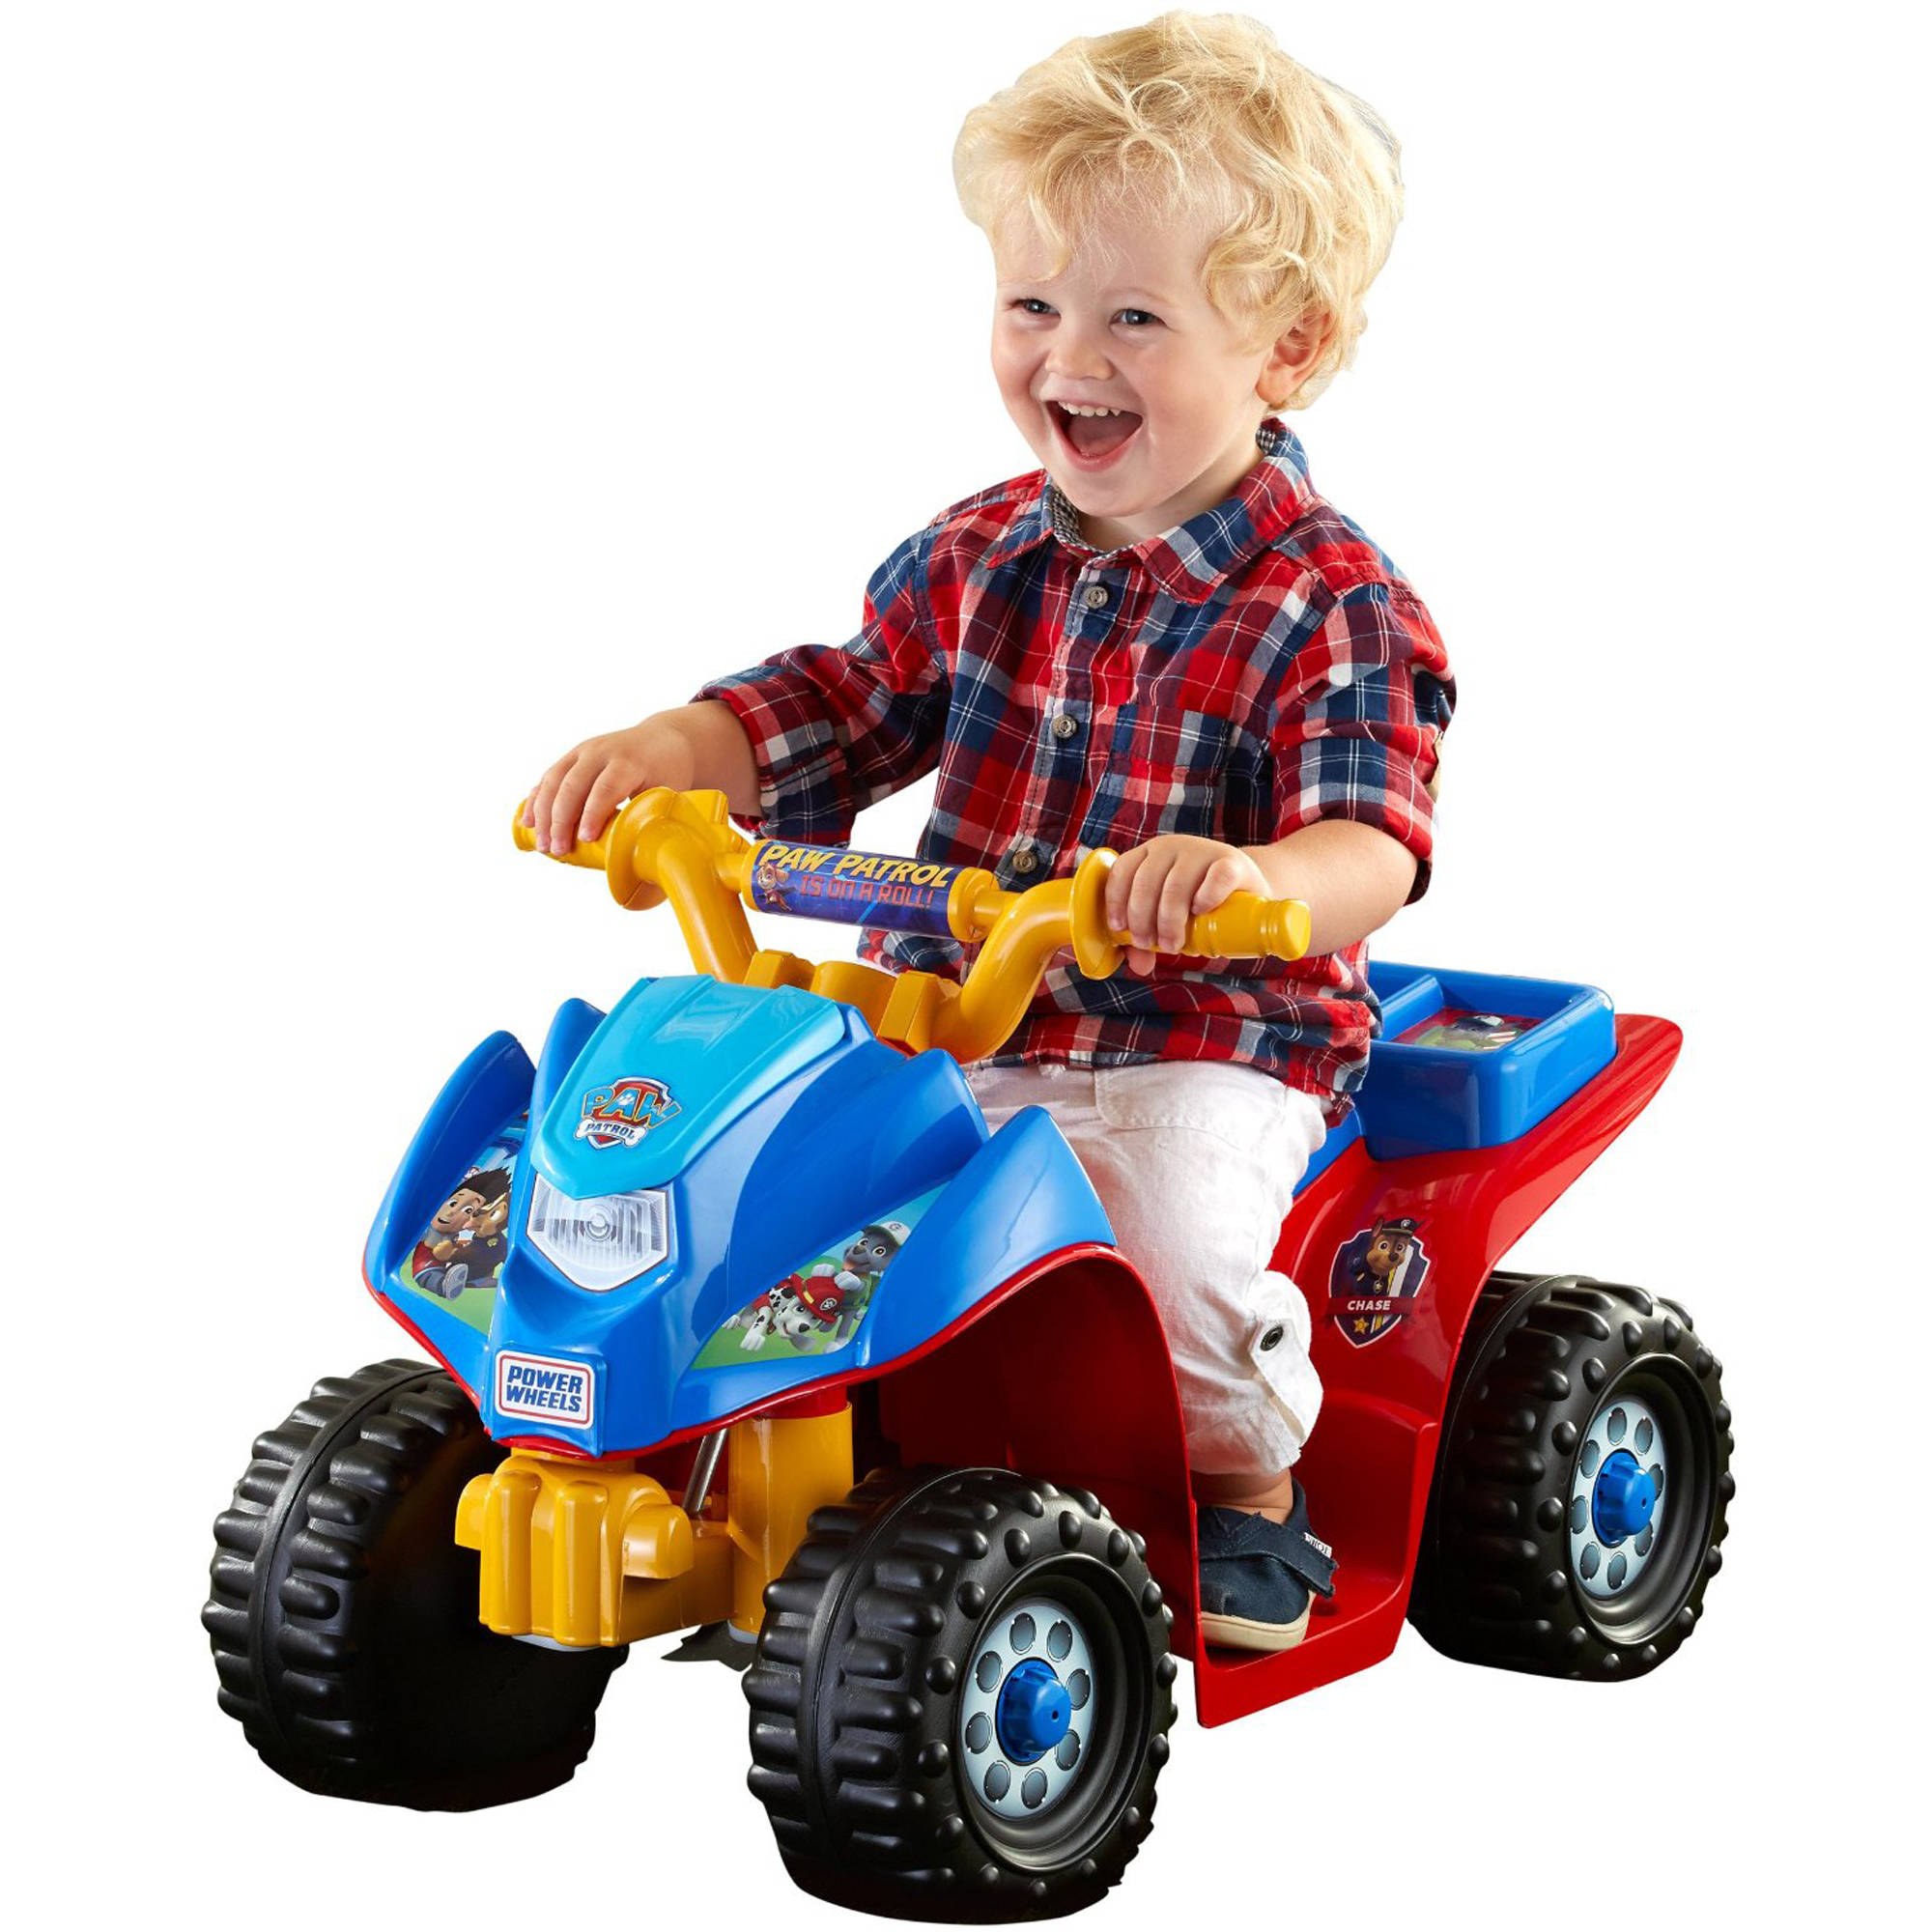 Power Wheels PAW Patrol Lil' Quad 6-Volt Battery-Powered Vehicle - image 1 of 9